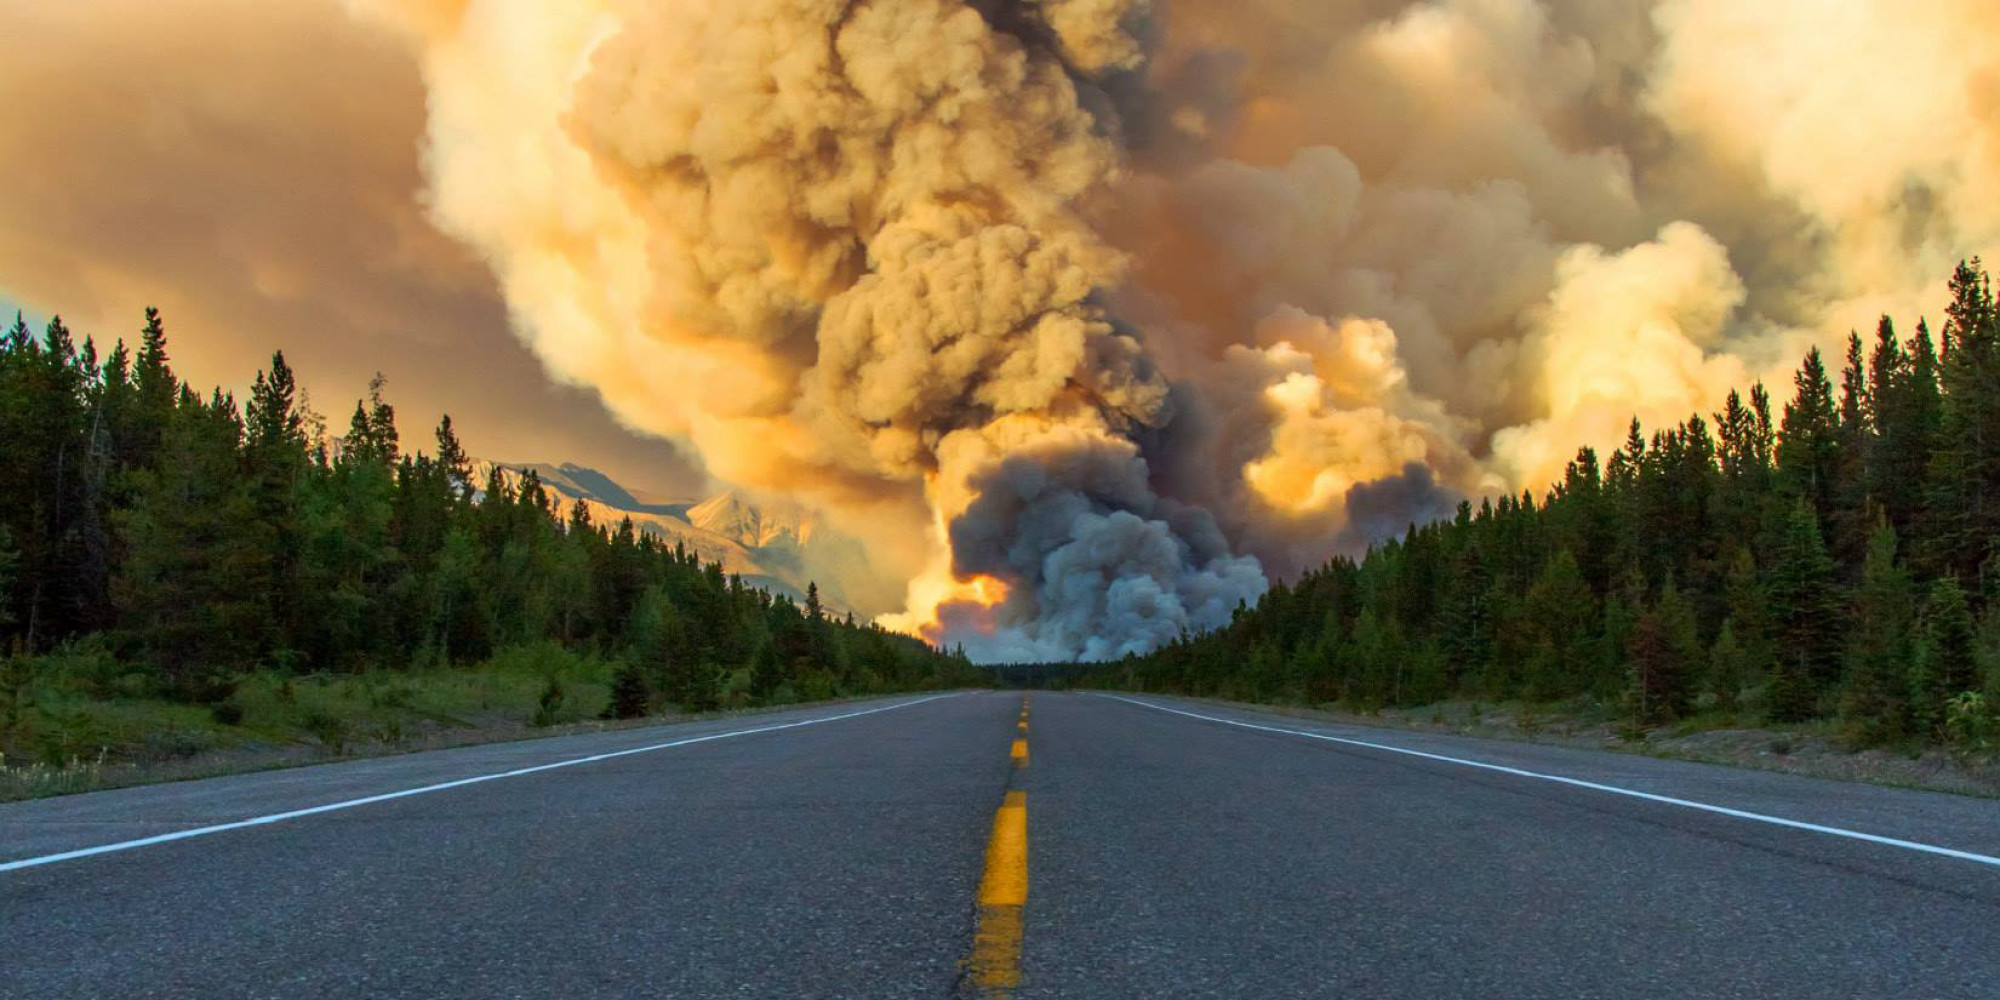 Banff National Park Wildfire Could Cause Travel Delays For Visitors